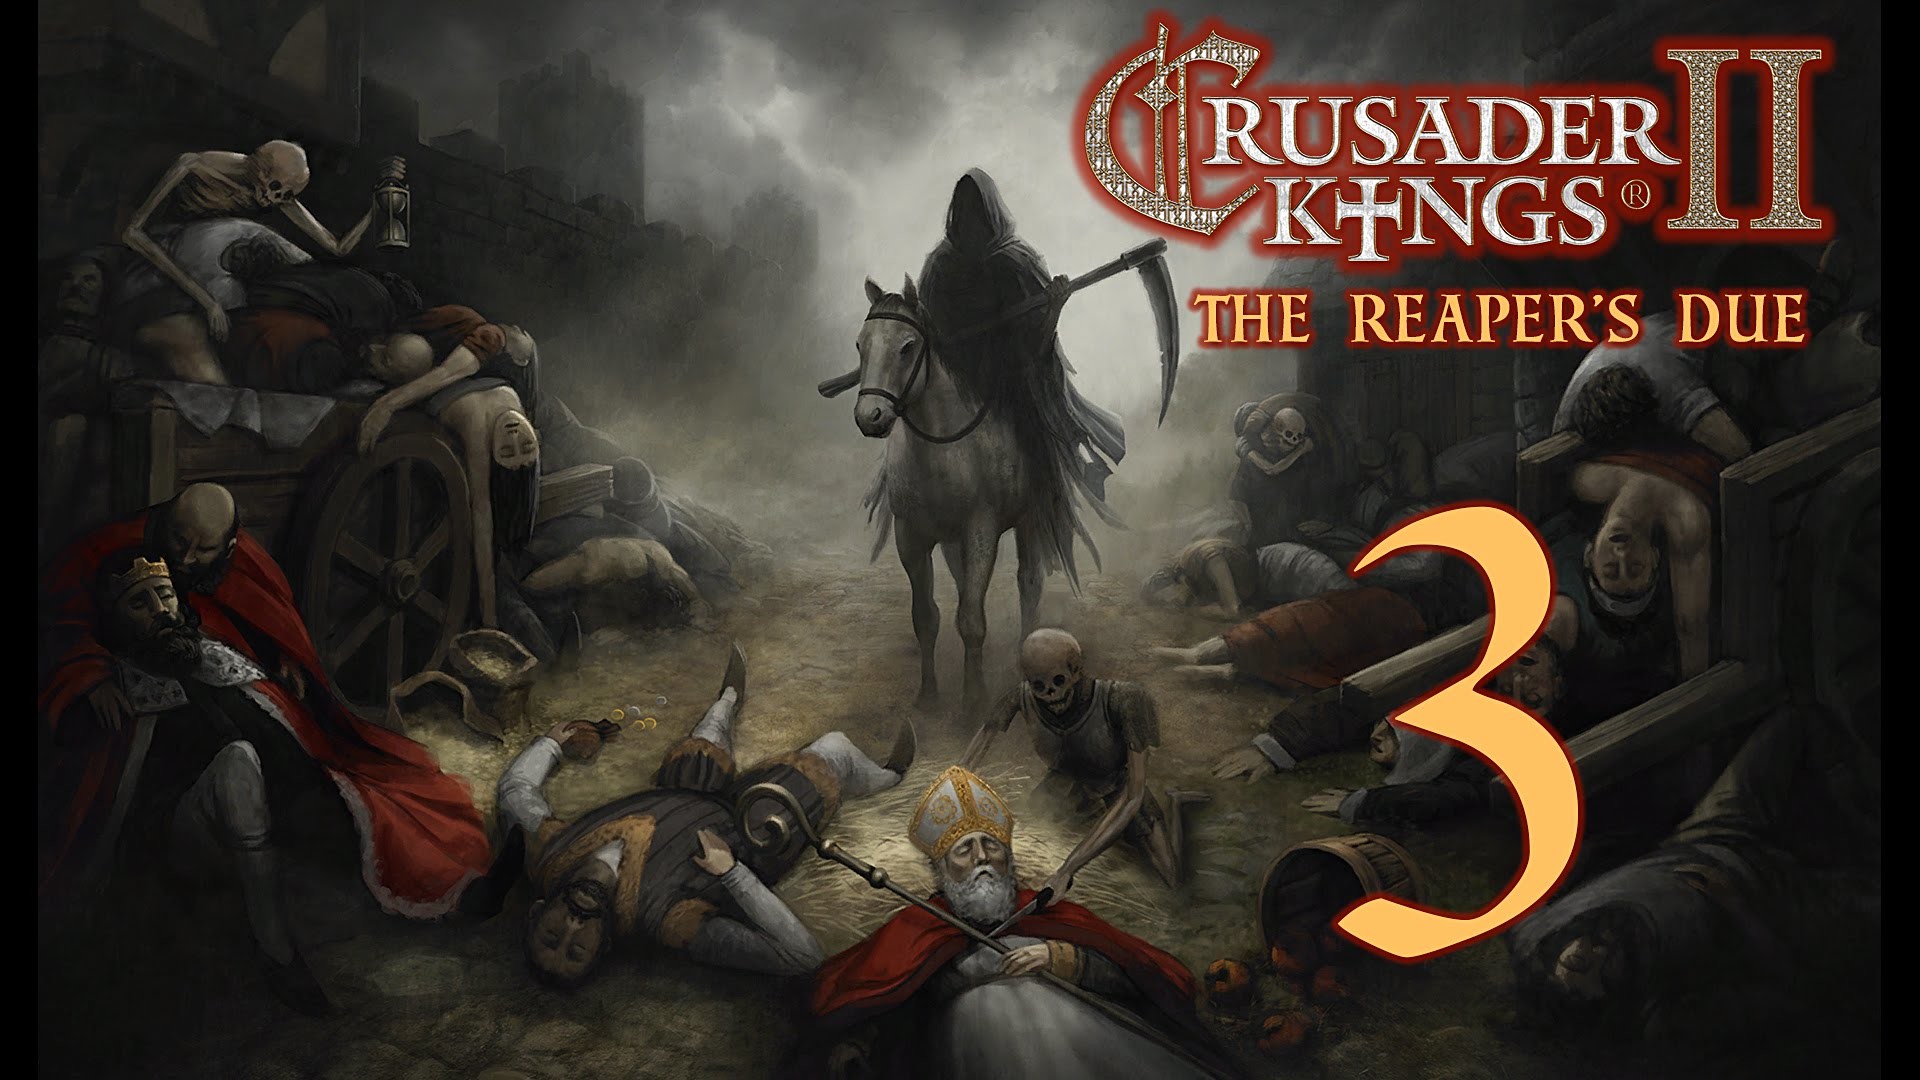 1920x1080 Crusader Kings 2: The Reaper's Due - BLACK DEATH Upon England Part 3